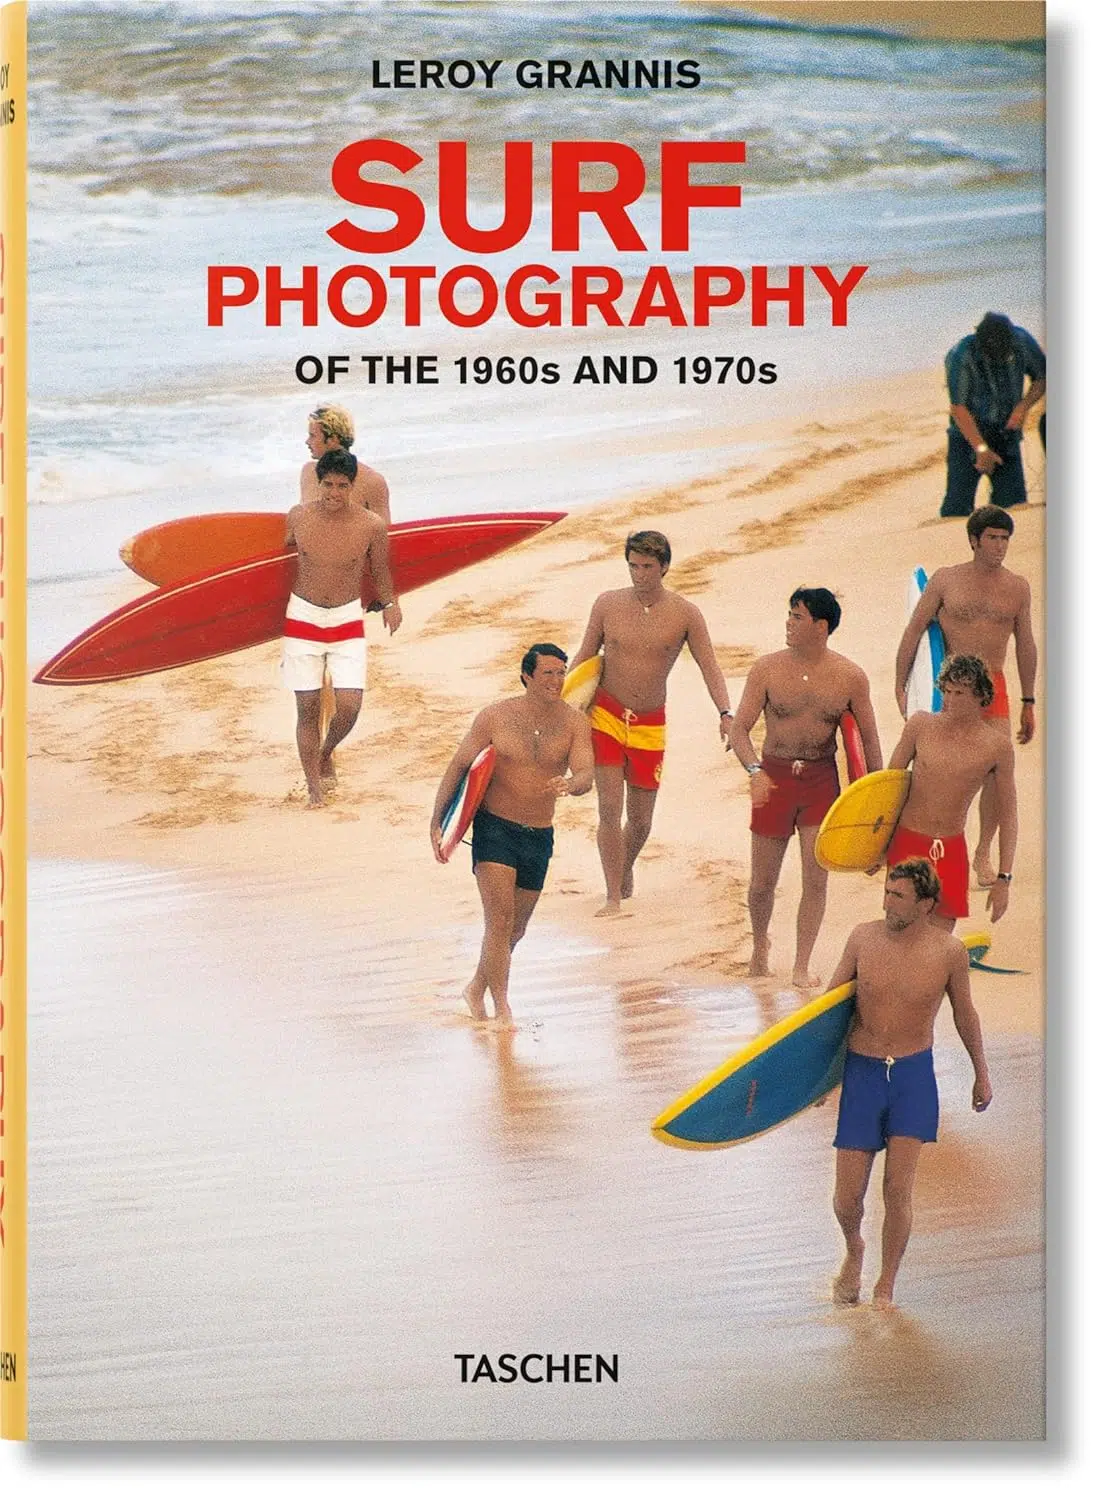 Leroy Grannis: Surf Photography of the 1960s and 1970s